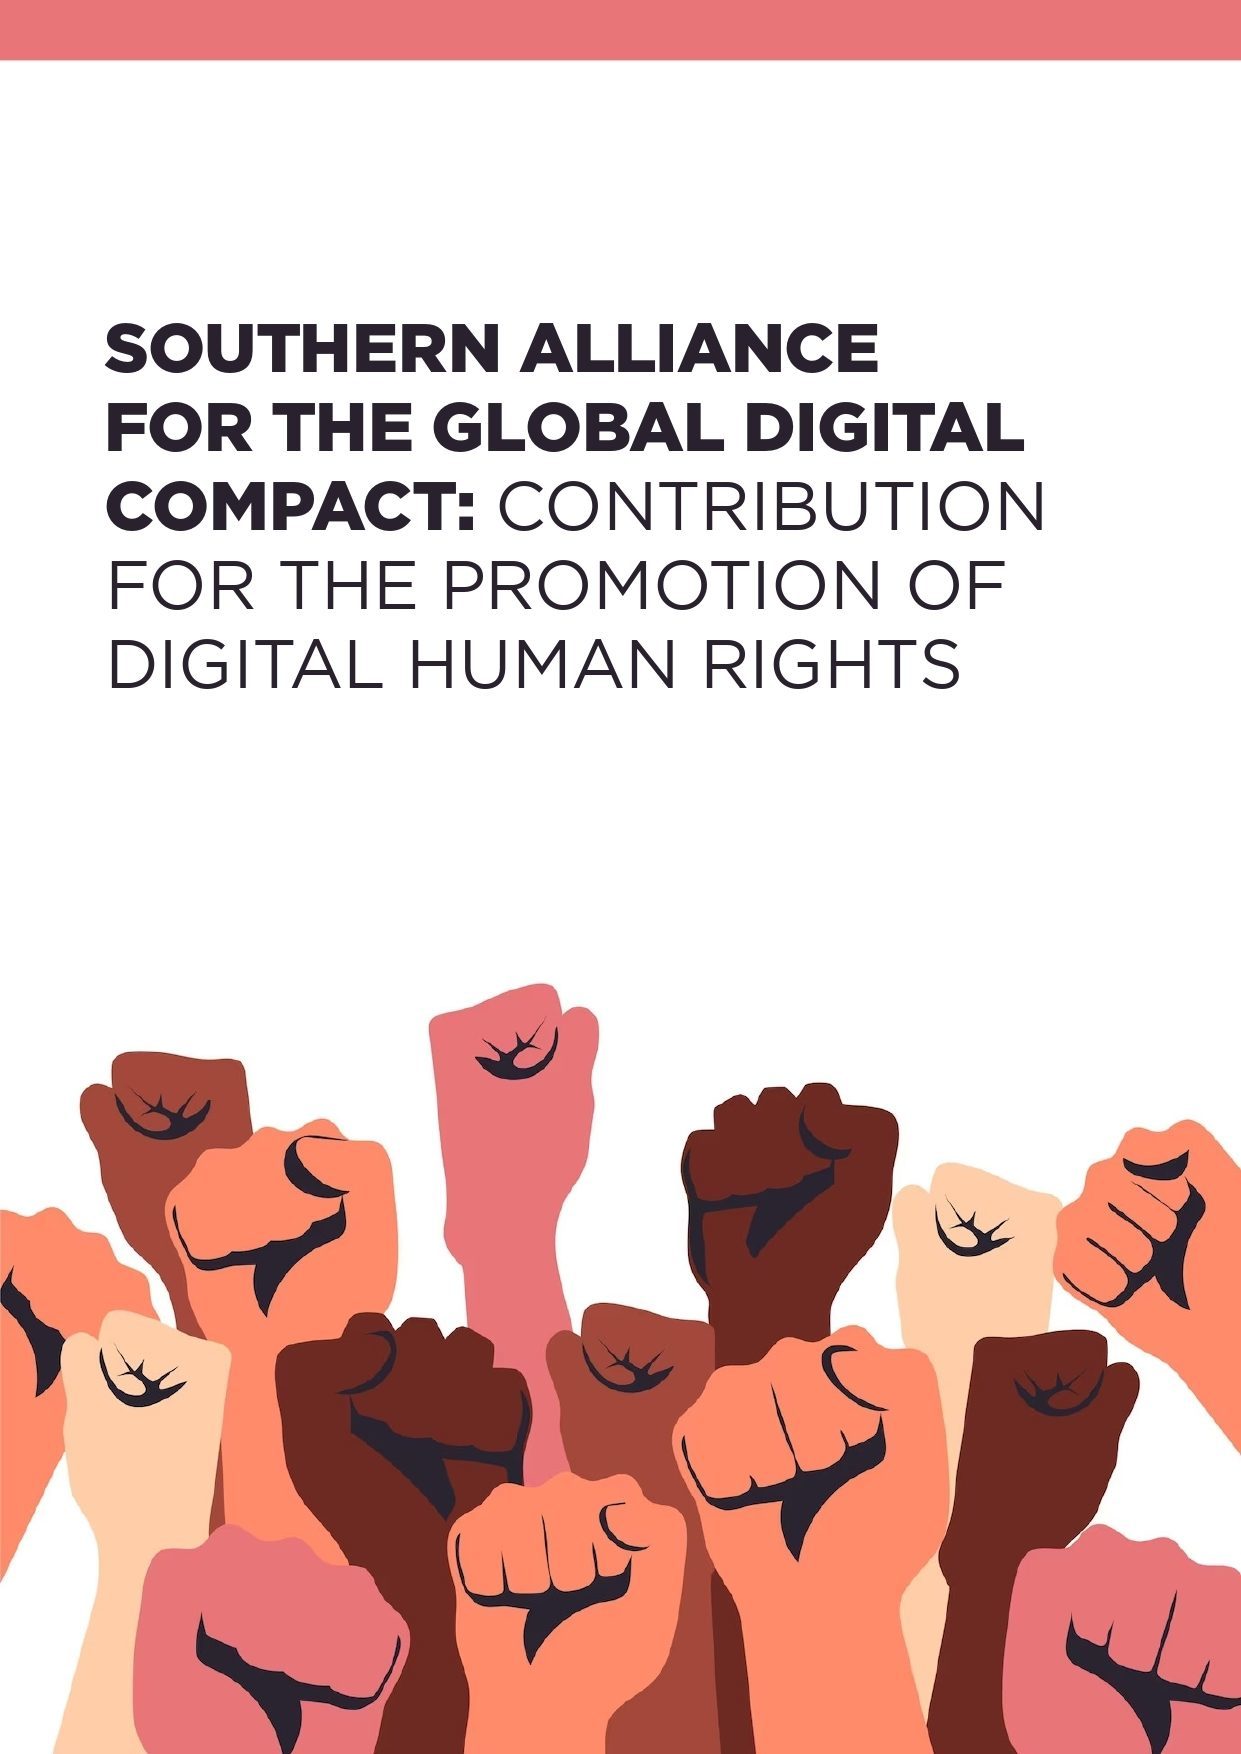  Southern Alliance for the Global Digital Compact